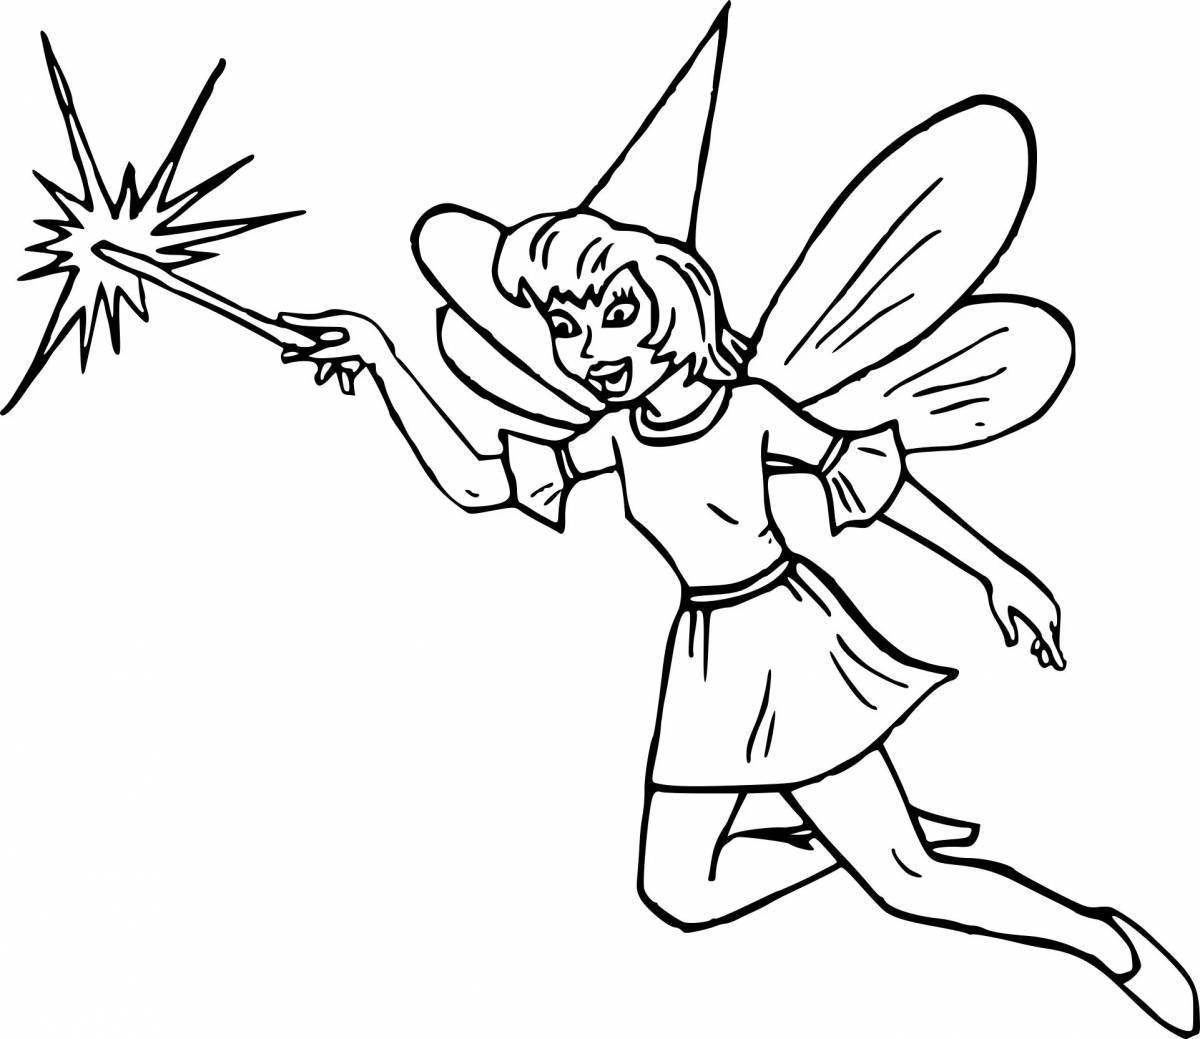 Fairytale coloring book magic for kids